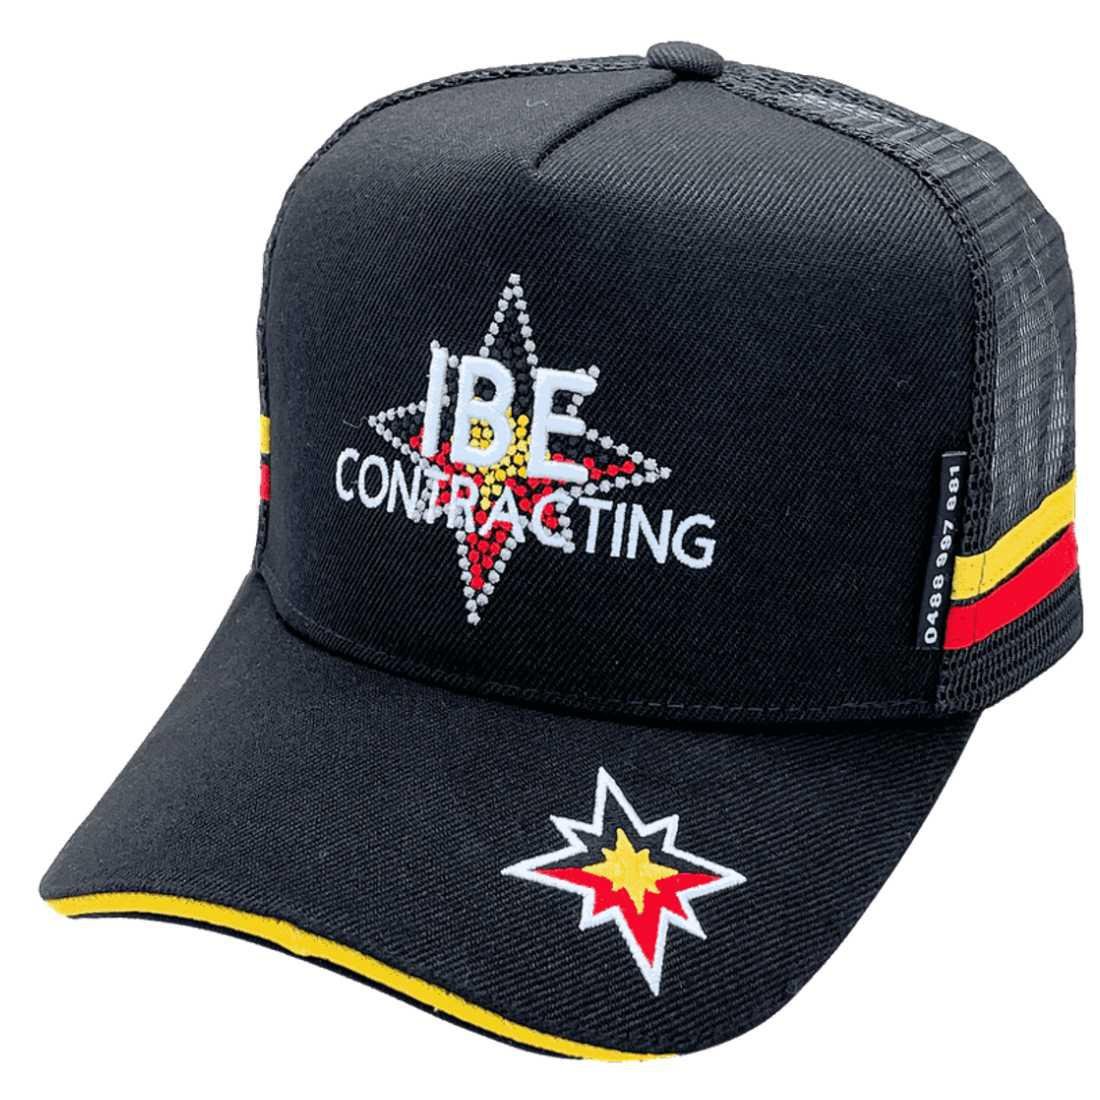 IBE Contracting - Power Aussie Trucker Hats Acrylic HP